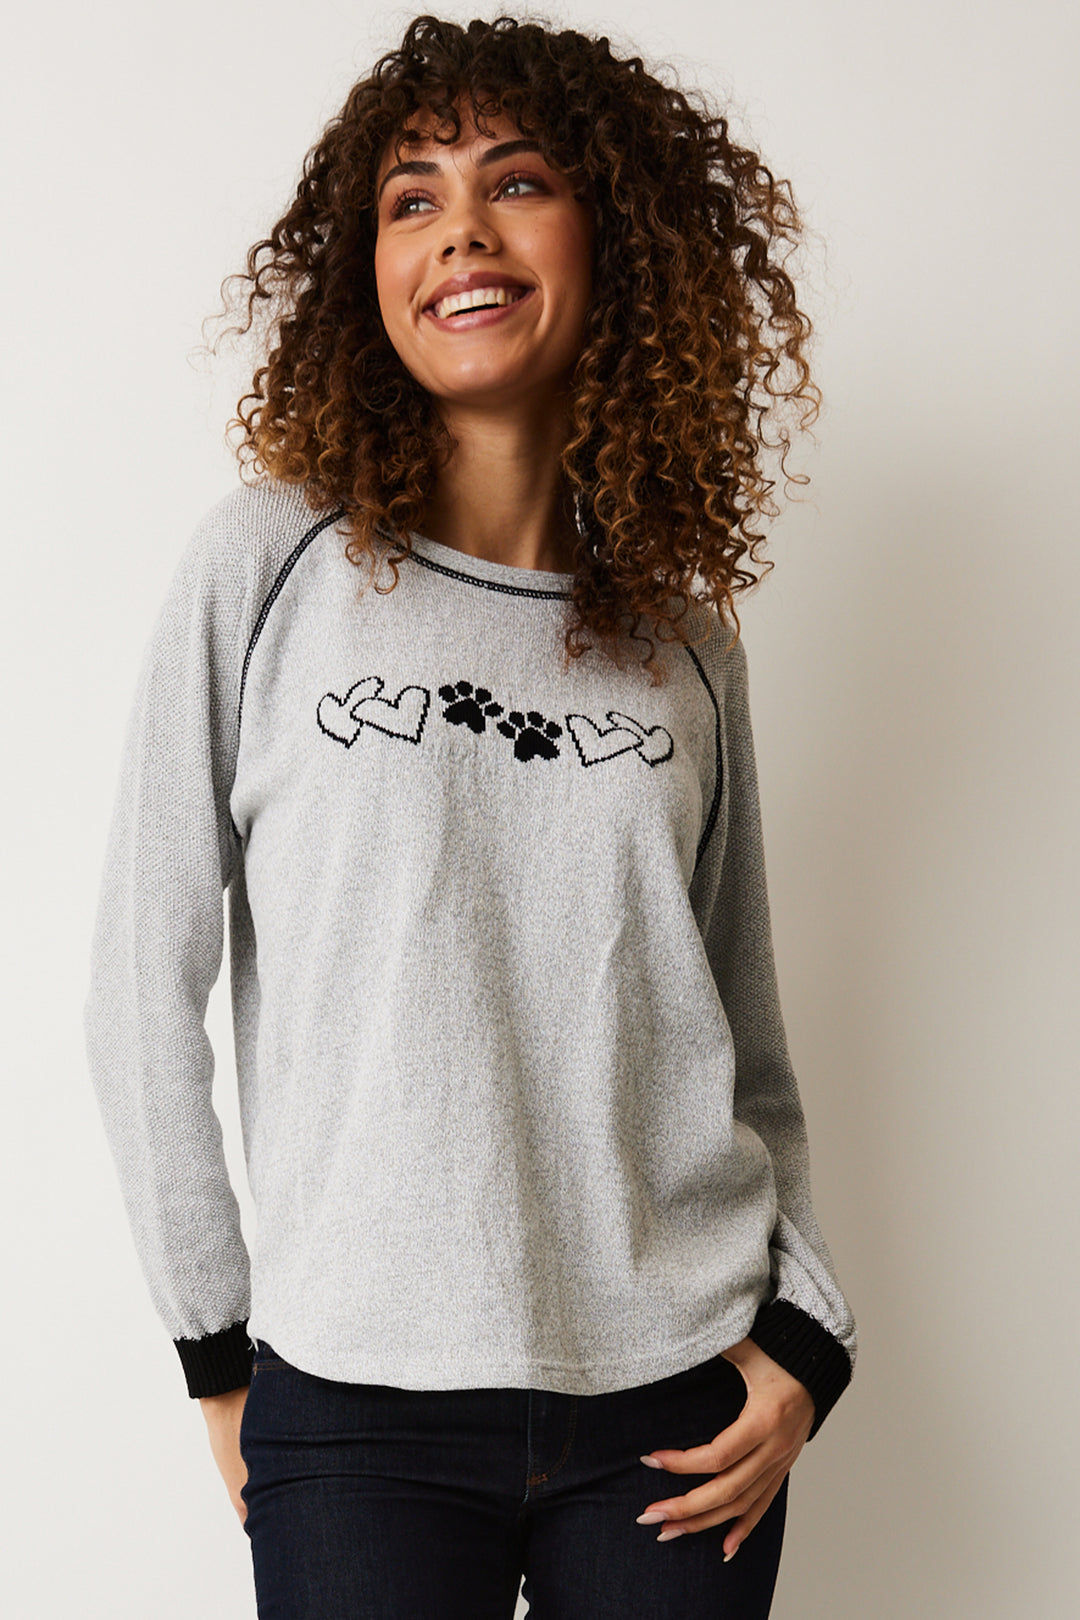 Crafted with 100% cotton and featuring a heart and pew print design, raglan sleeves and a rolled hem, this oh-so-sweet crewneck is sure to turn heads. 